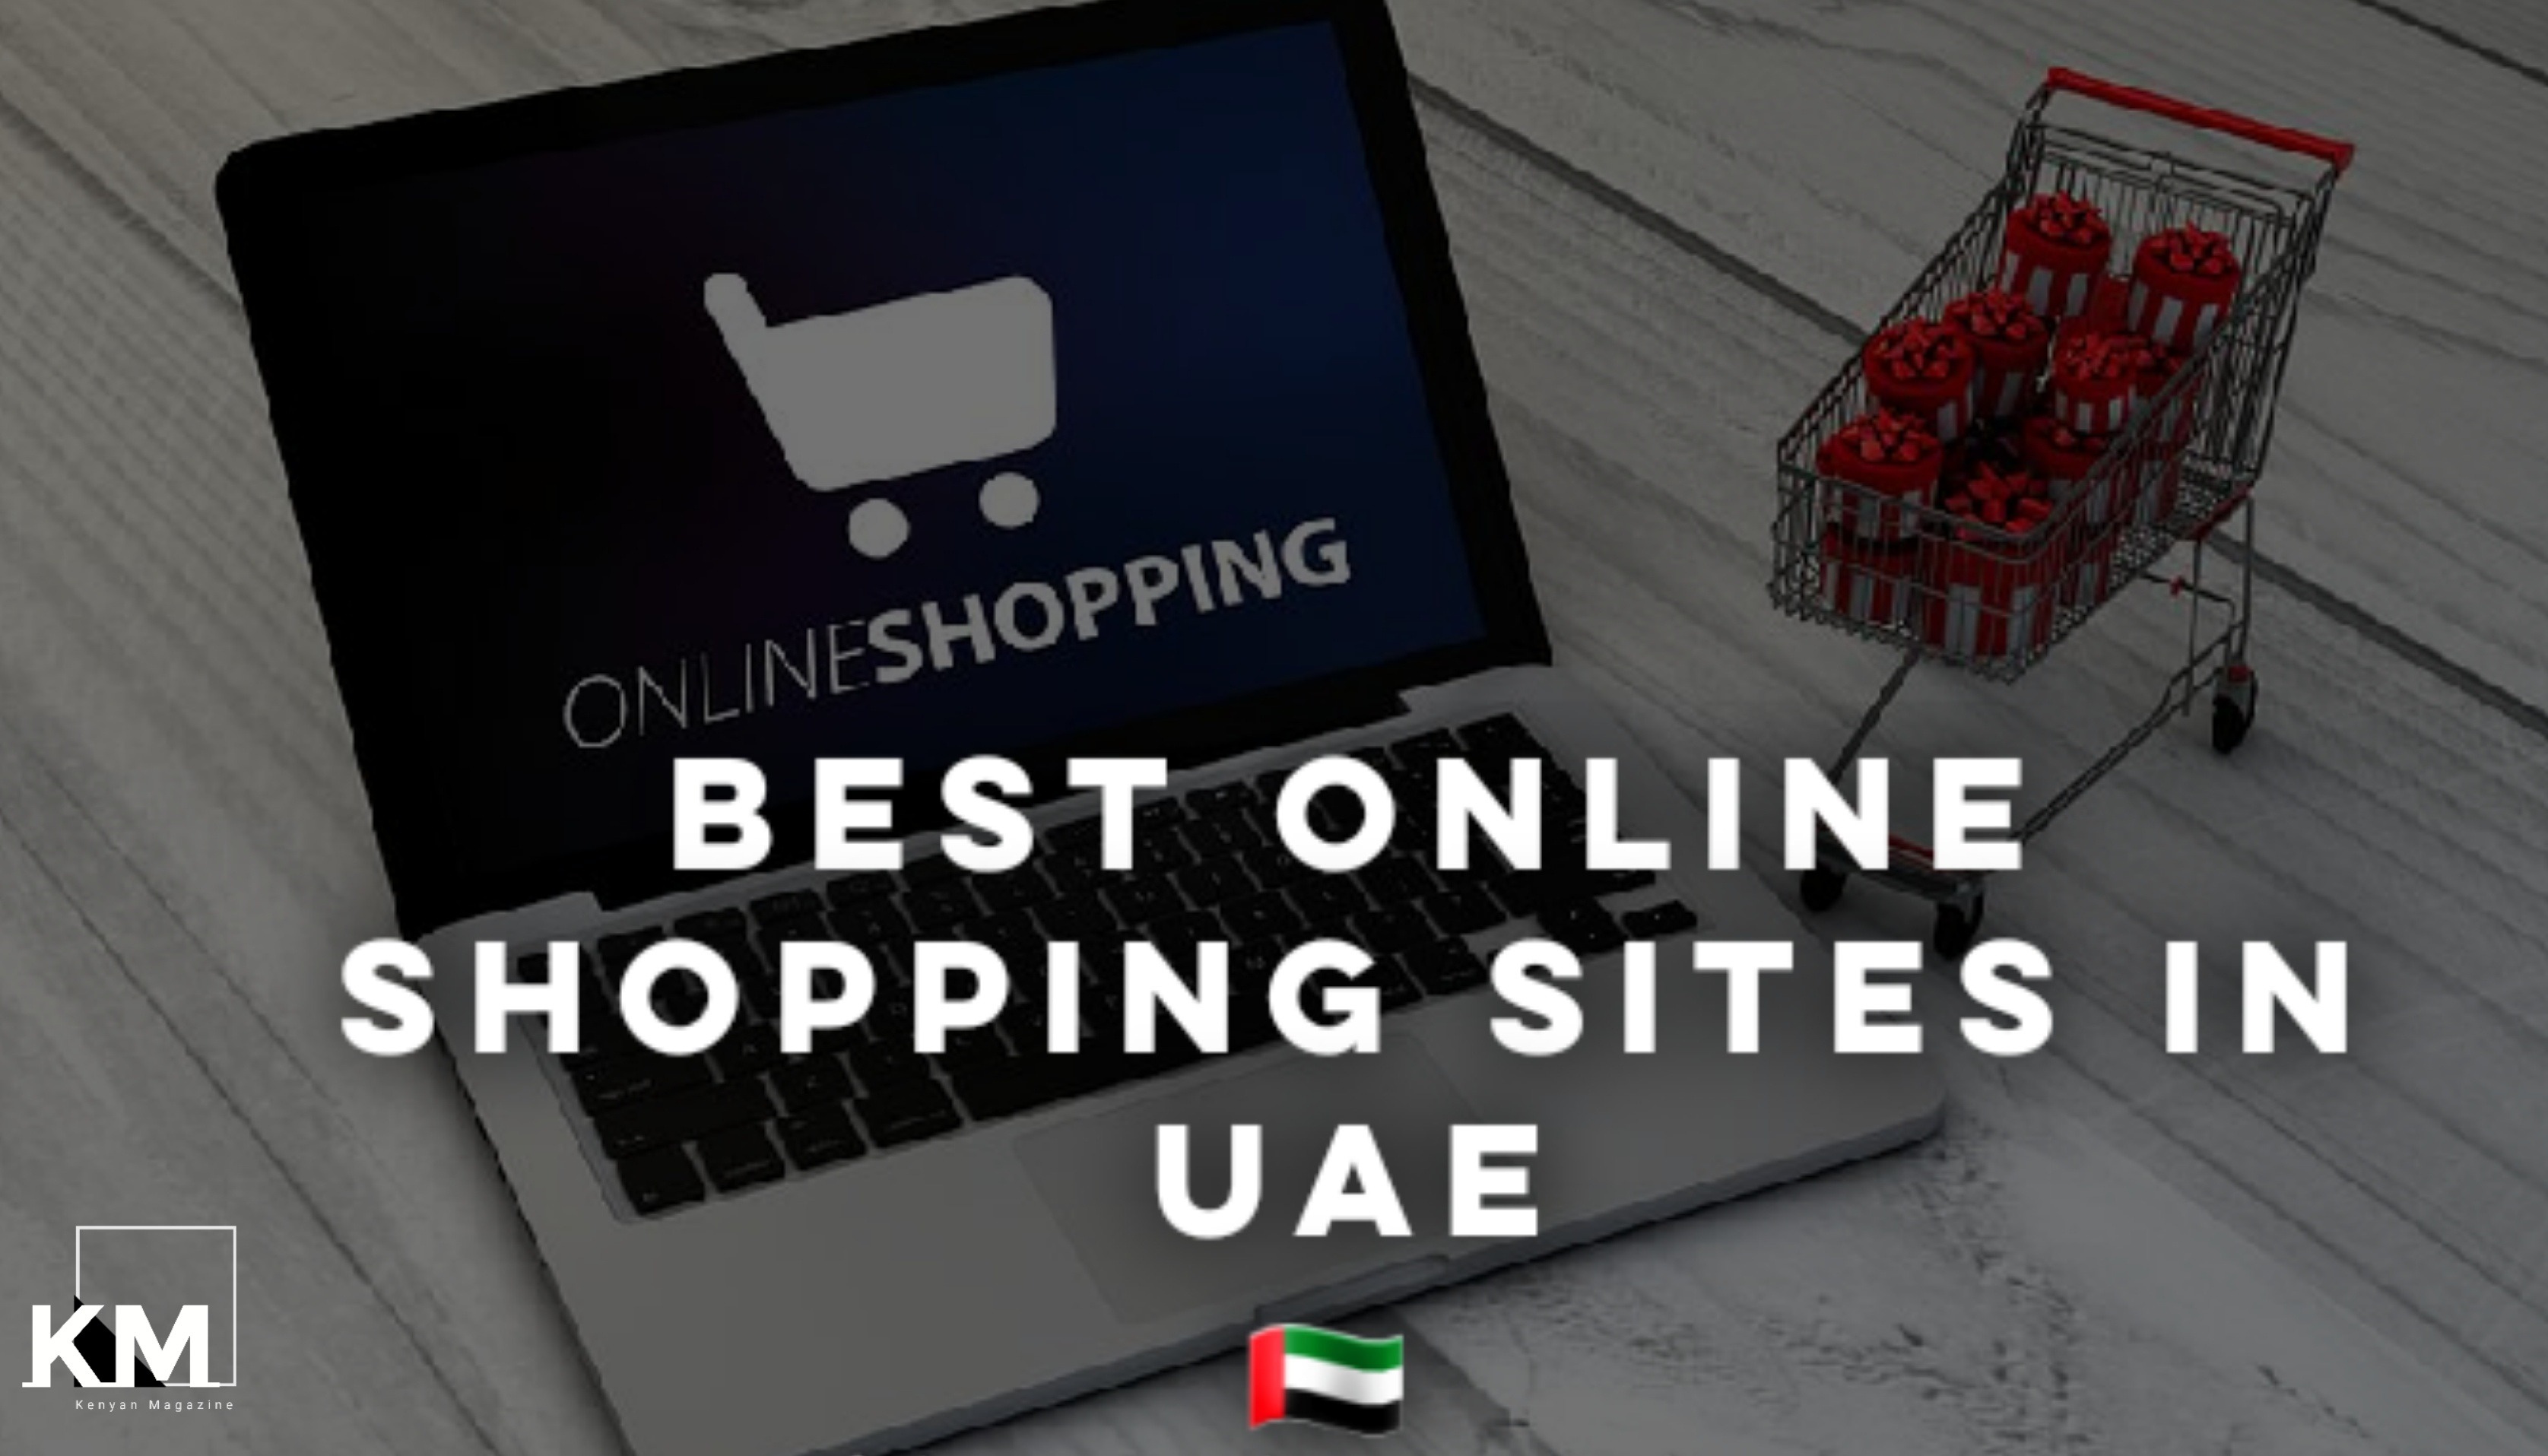 Online shopping sites in UAE